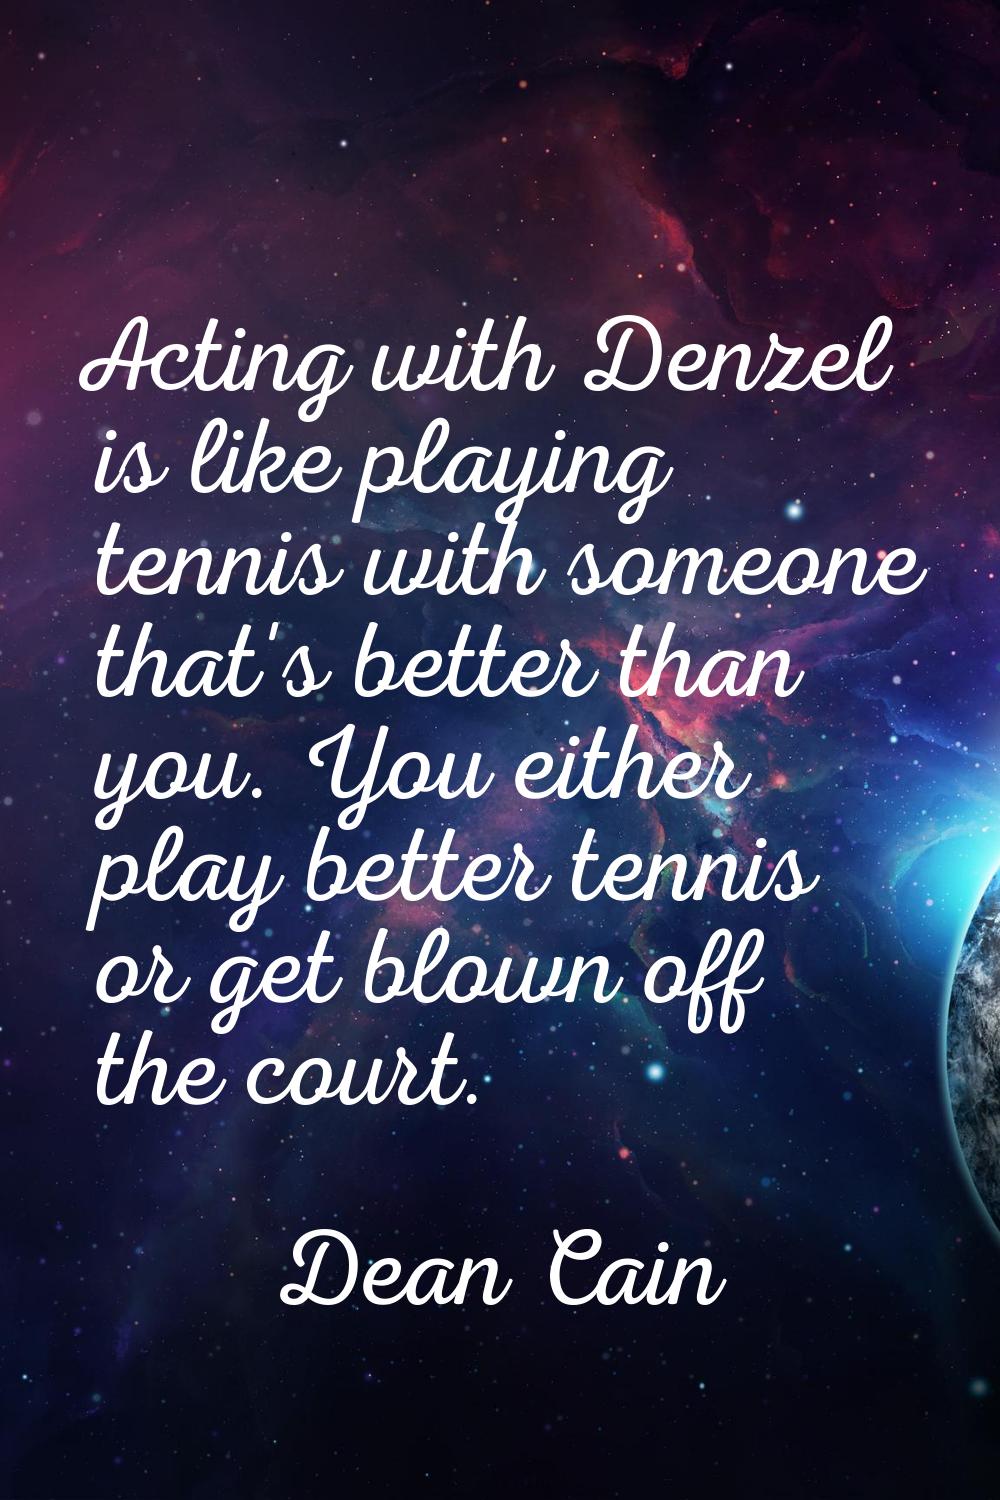 Acting with Denzel is like playing tennis with someone that's better than you. You either play bett